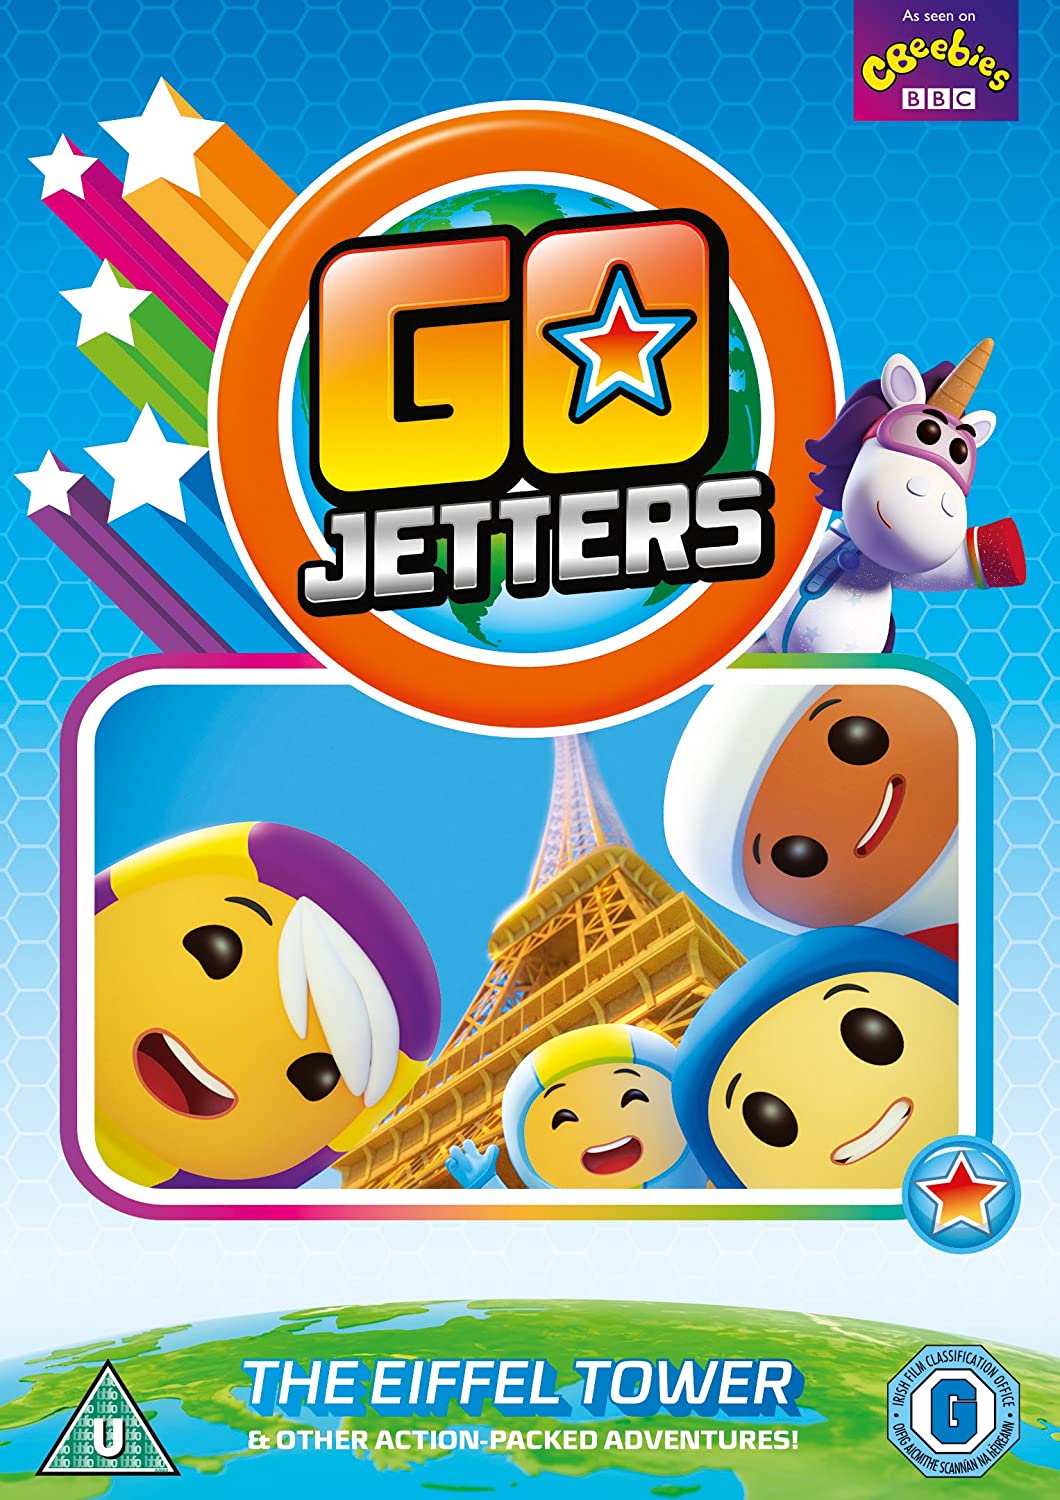 Go Jetters - The Eiffel Tower And Other Adventures [DVD]